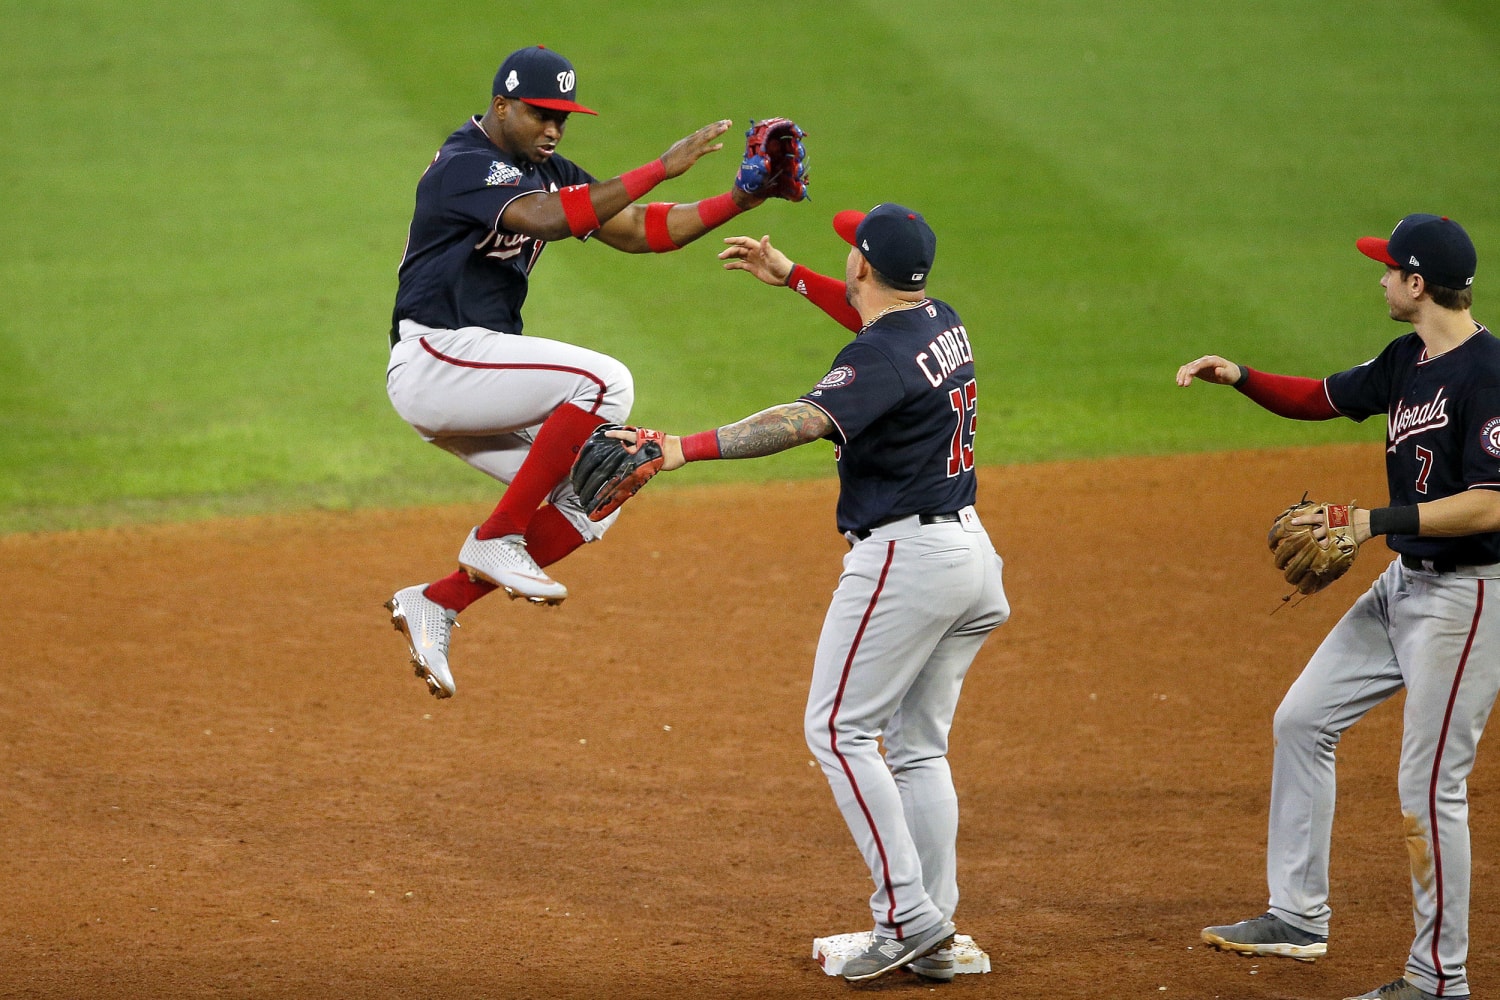 World Series, Game 7: Nationals 6, Astros 2